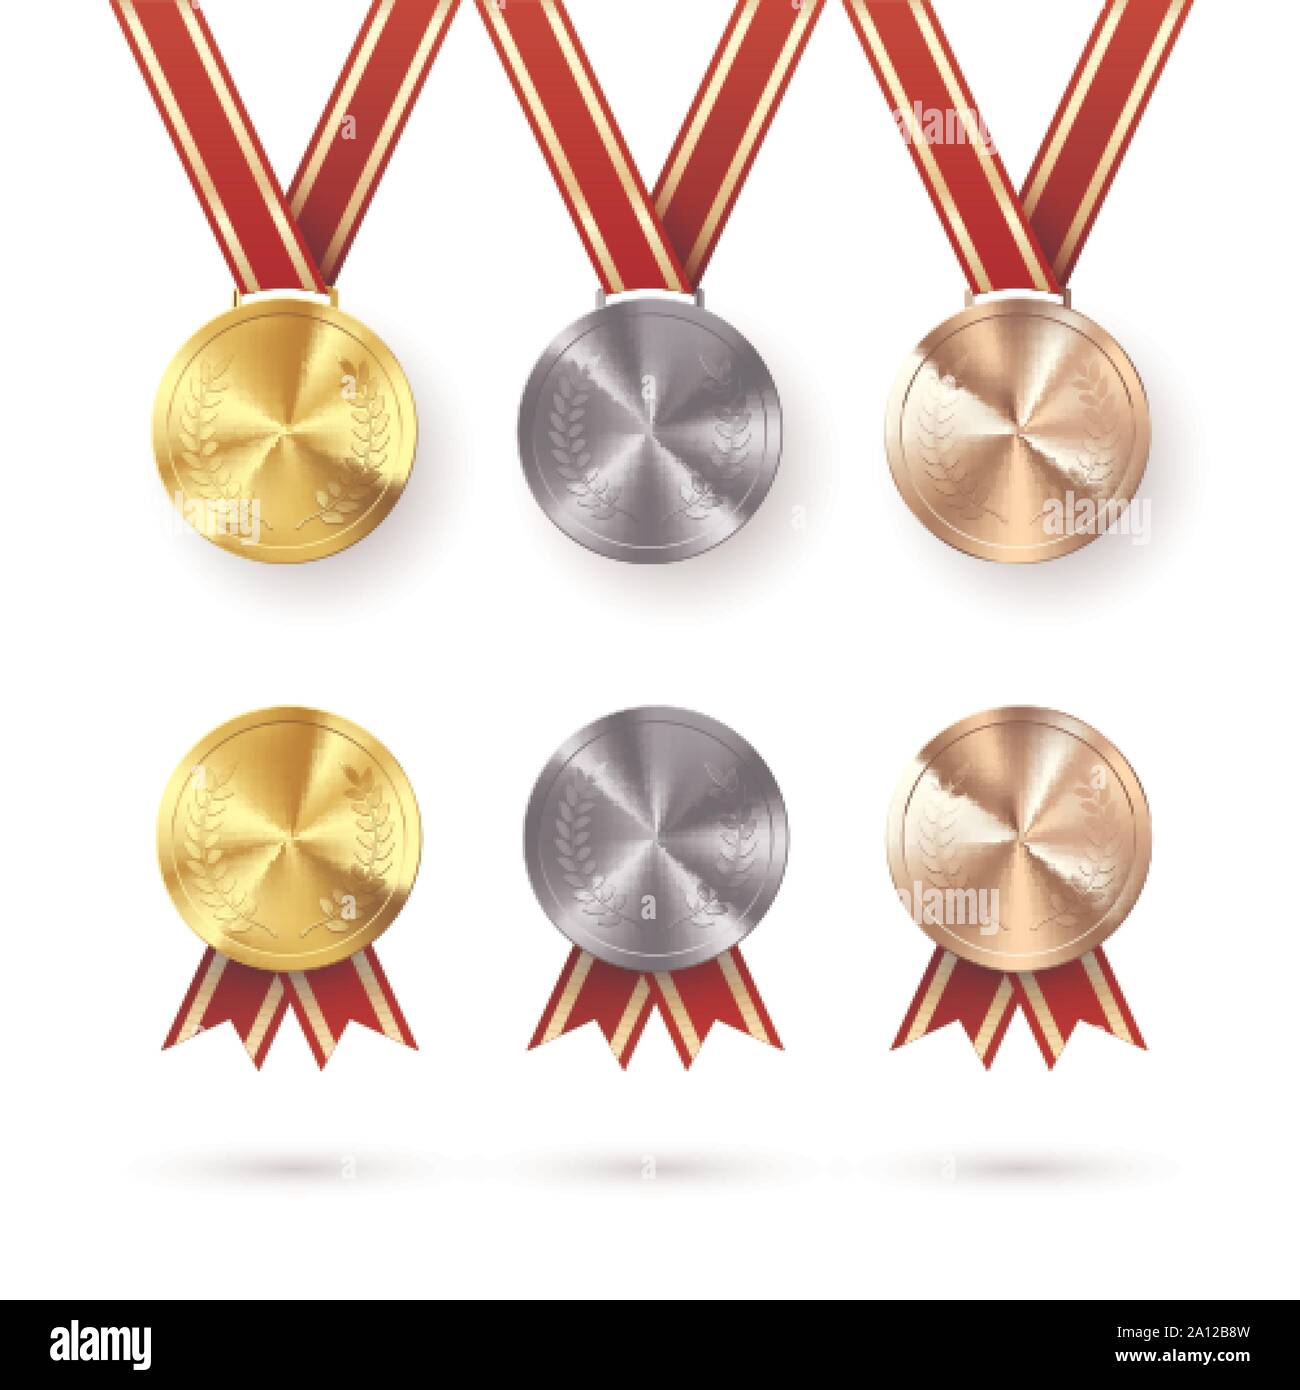 Set of Awards. Golden Silver and Bronze medals with laurel hanging on red ribbon. Award symbol of victory and success. Vector illustration isolated on Stock Vector